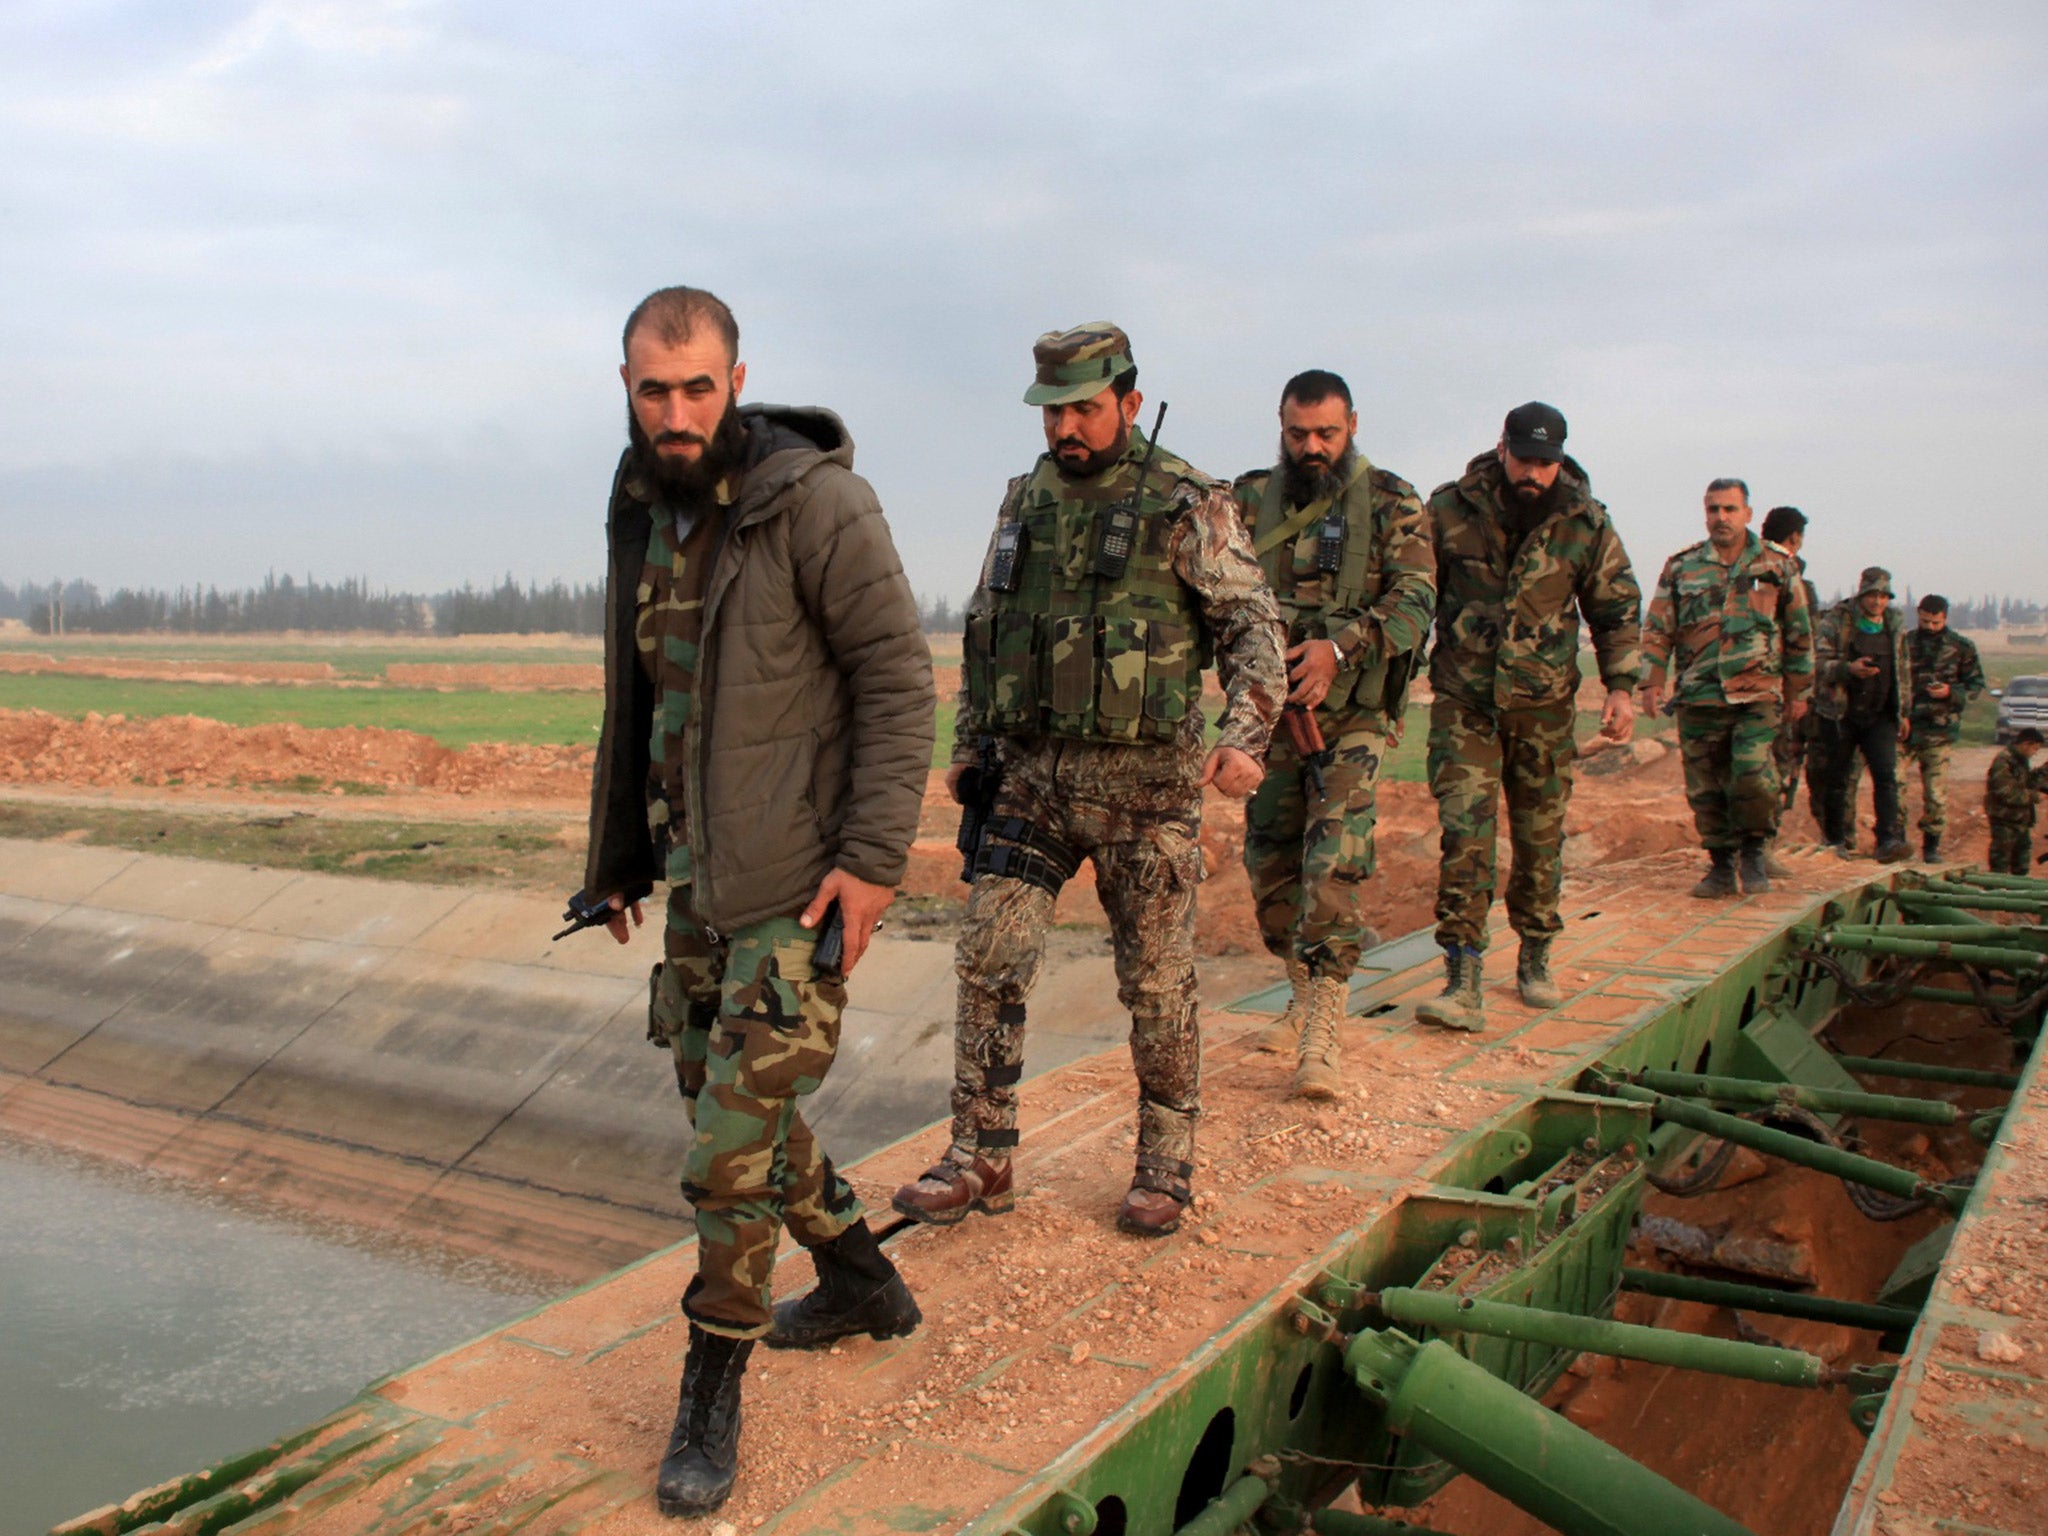 Syrian government forces cross a retractable military bridge on the outskirts of Aleppo